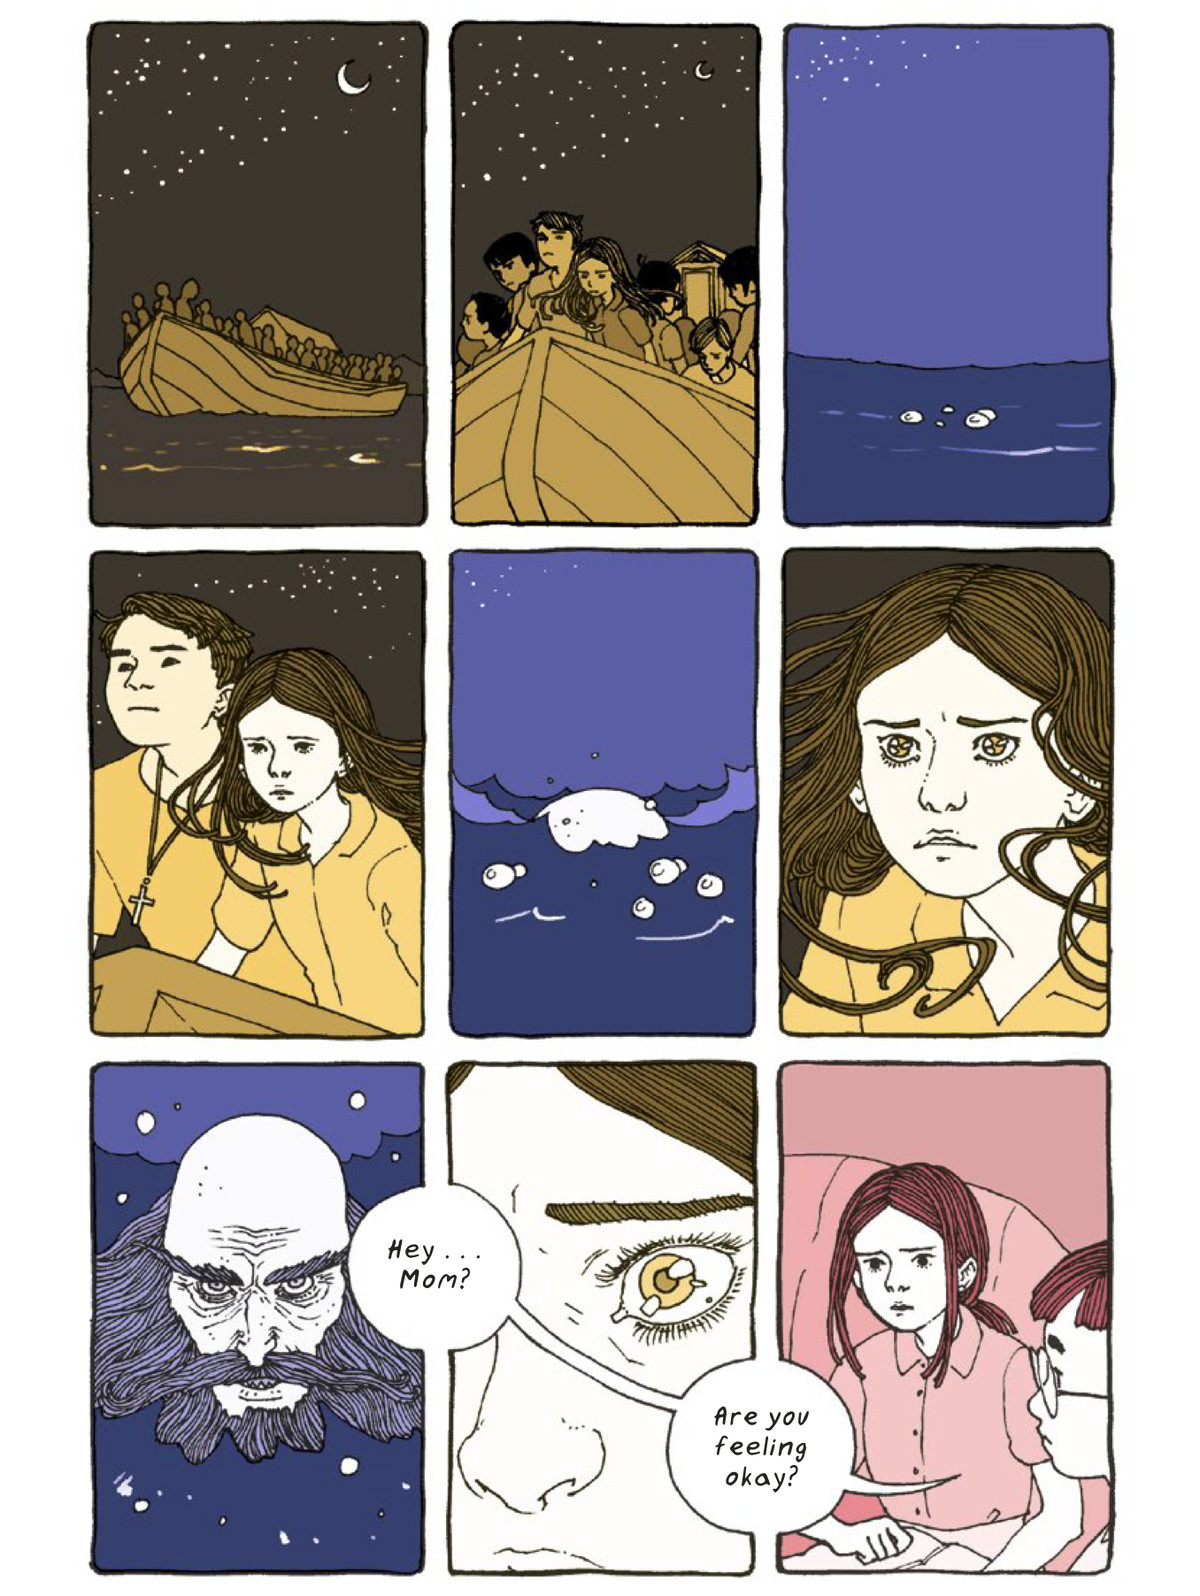 In yellow panels of the past, Tiến’s mother remembers sailing away from her home in Vietnam, in blue panels of the fairy tale story she’s reading, the bald and bearded face of the King of the Mists rises from the waves of the sea, in red panels of the present, Tiến asks “Hey... mom? are you feeling OK?” in The Magic Fish, Random House Graphic (2020). 